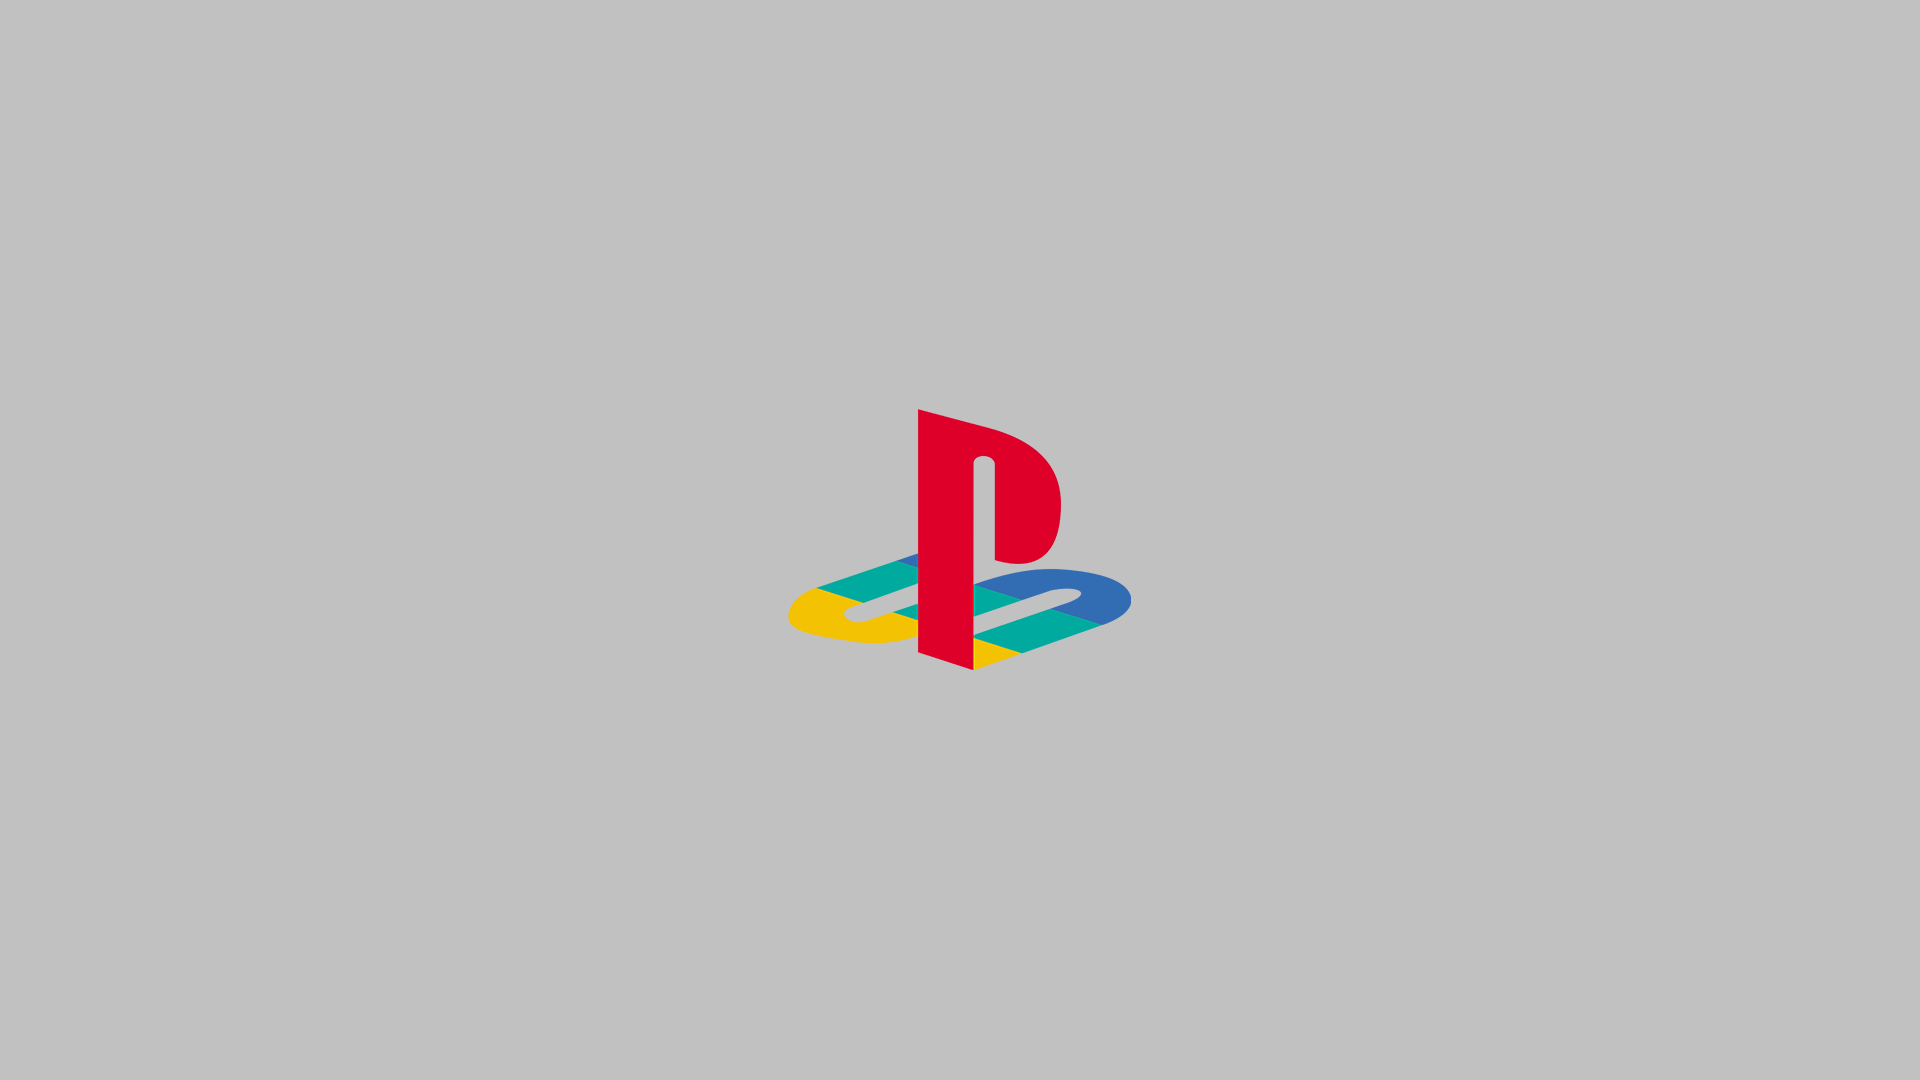 PS1 Wallpaper Free PS1 Background